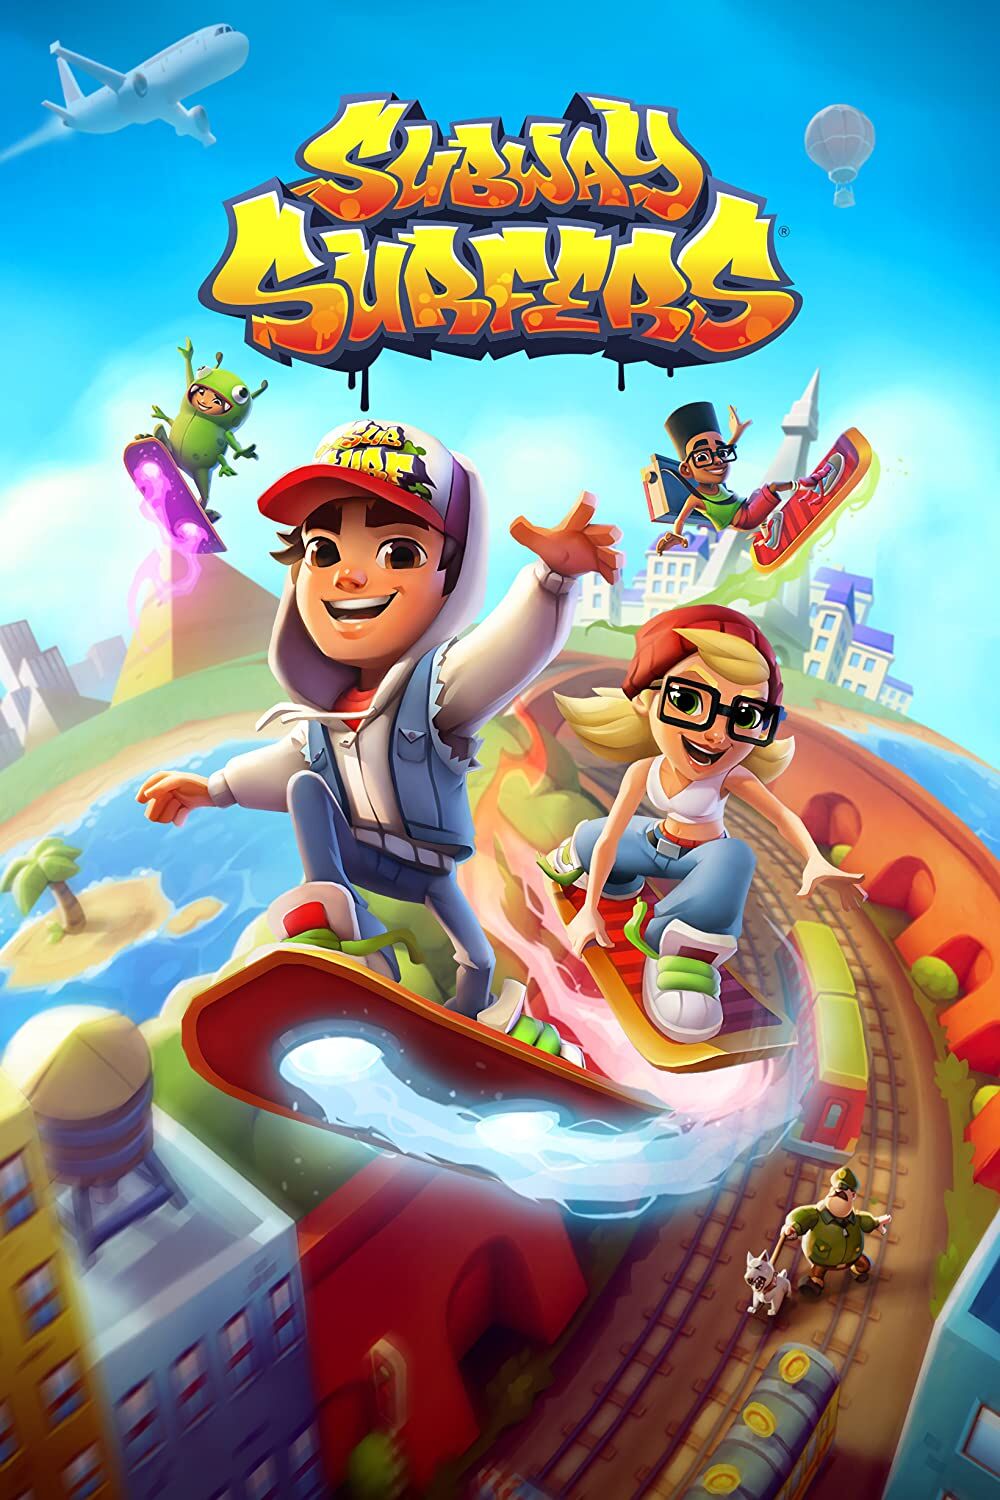 Subway Surfers Game : How to Download for Android, Pc, Ios, Kindle + Tips